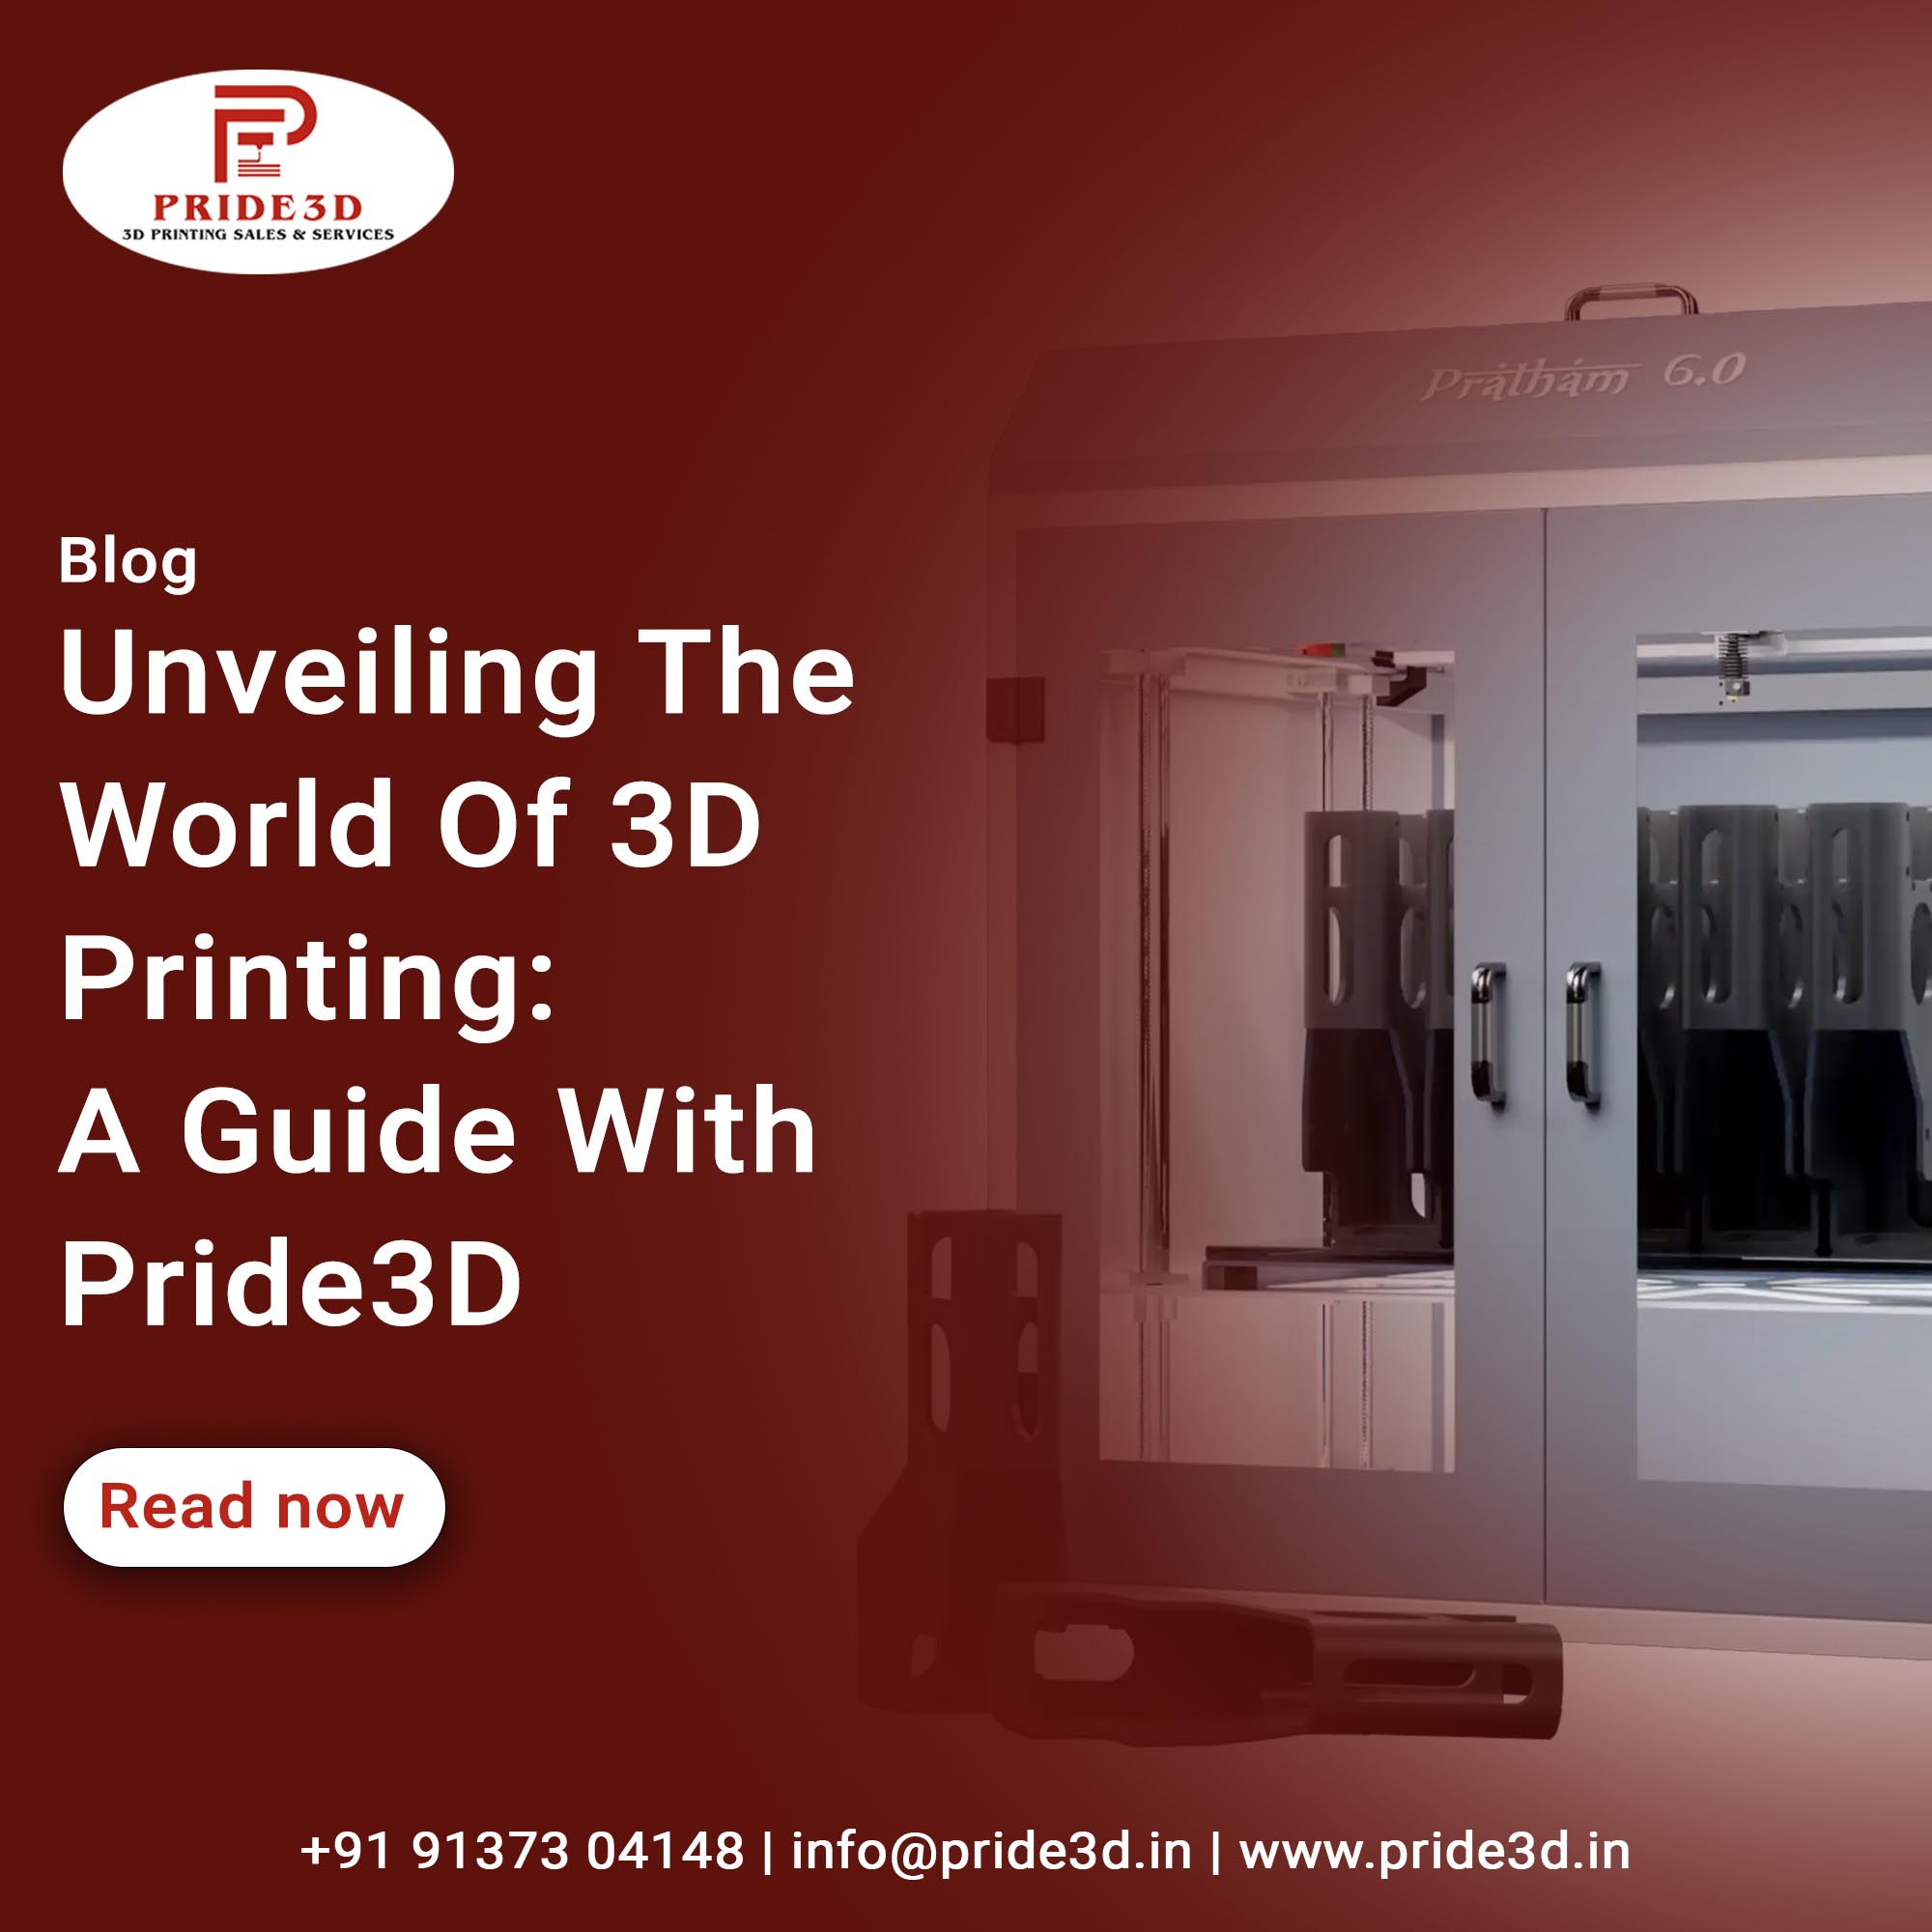 Unveiling The World Of 3D Printing: A Guide With Pride3D